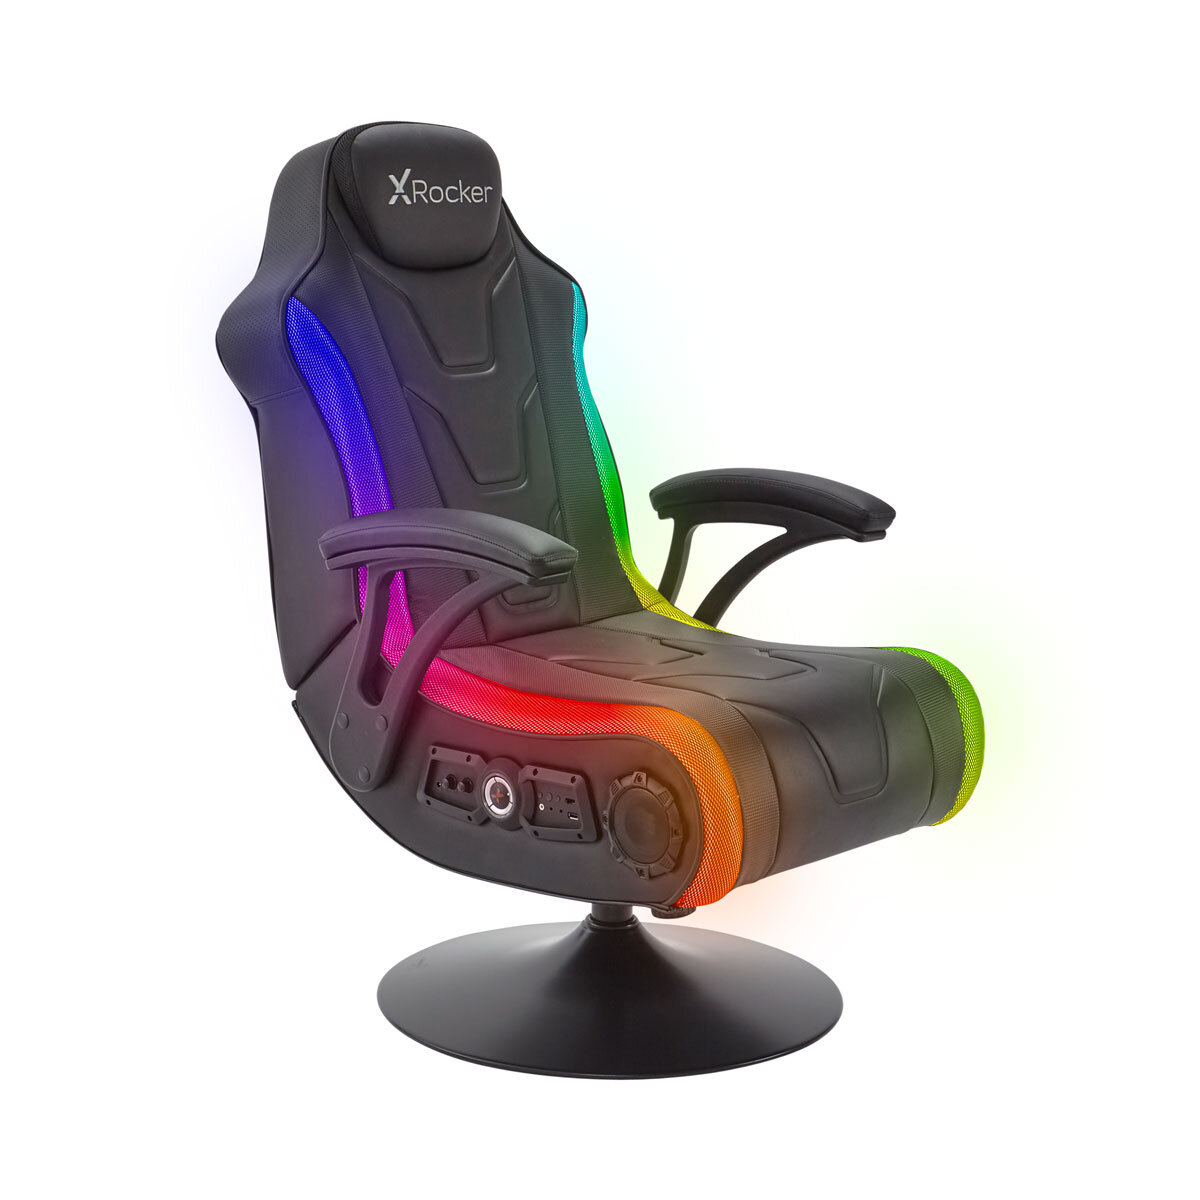 X Rocker Gaming Chair on White Background